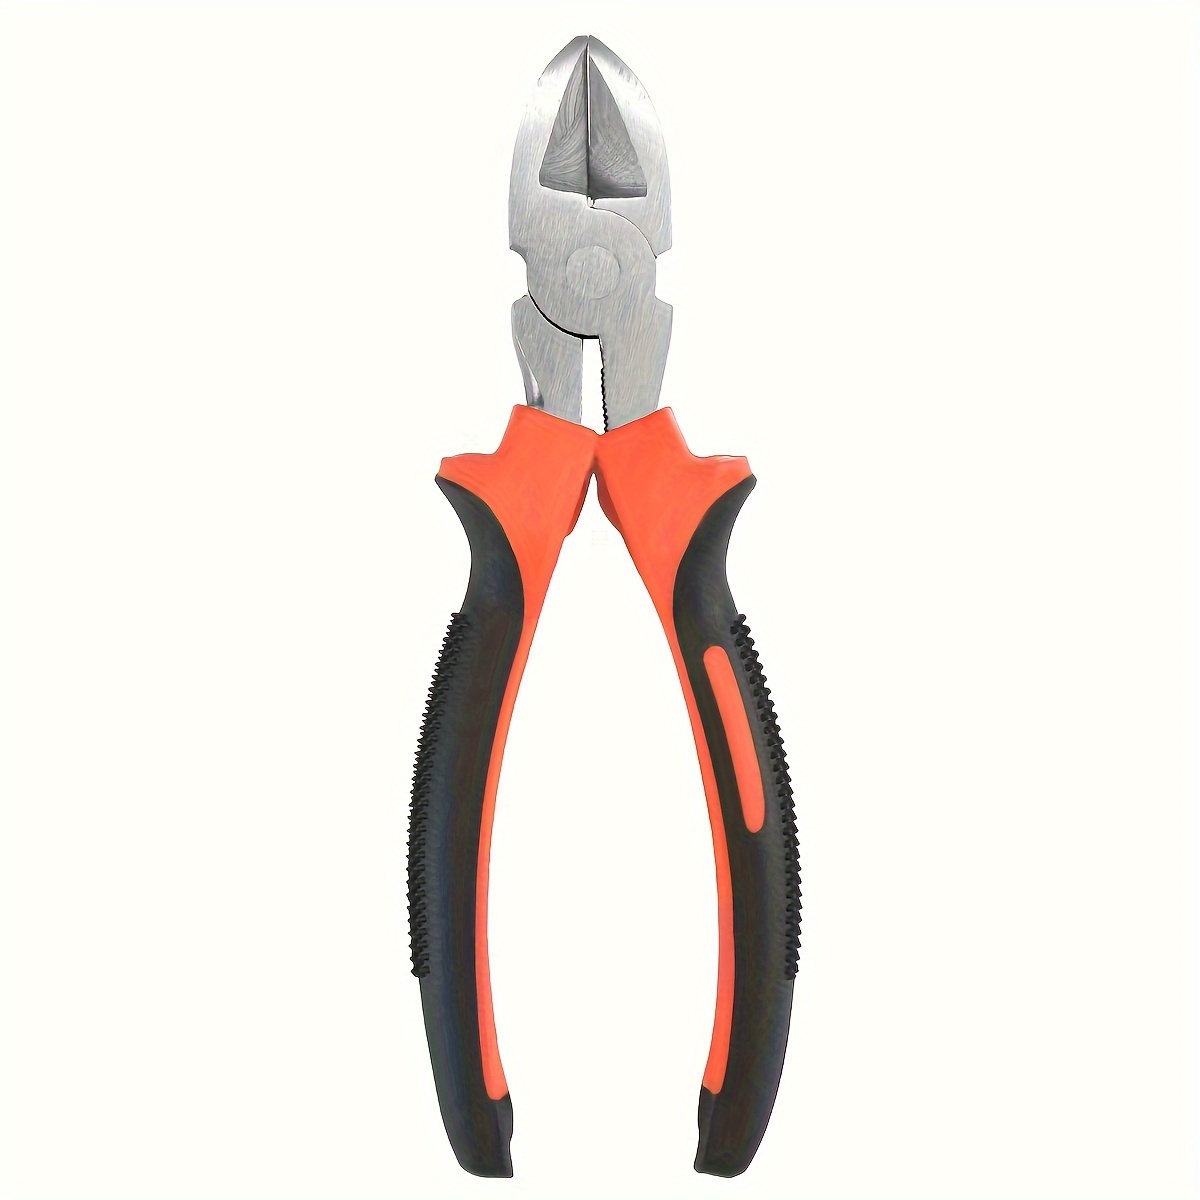 Heavy Duty Flat Nose Duck Bill Pliers - TOPTUL The Mark of Professional  Tools